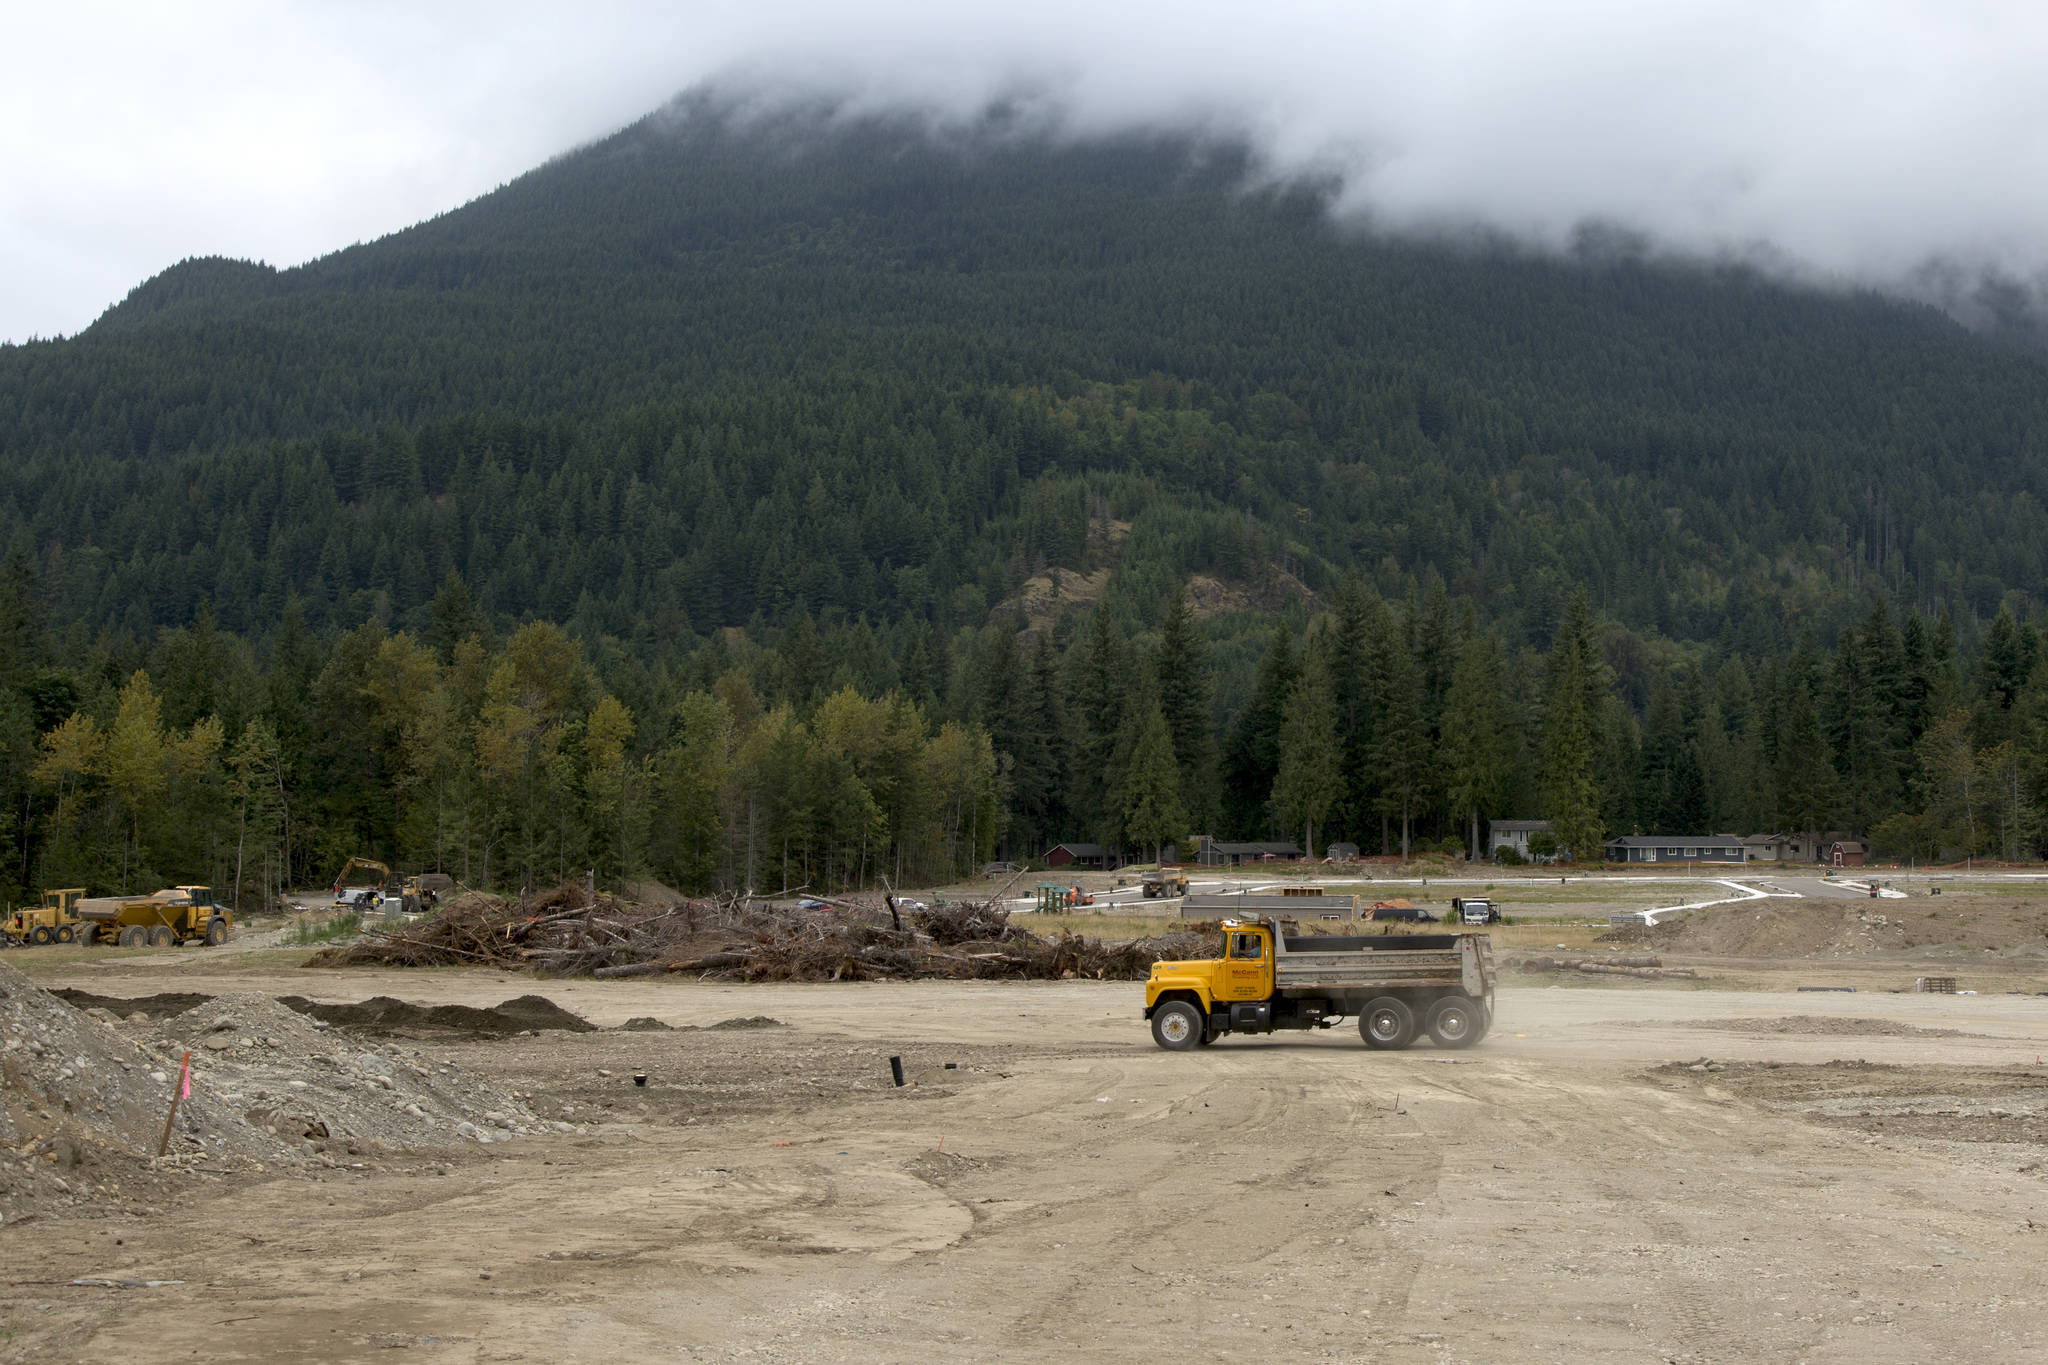 In North Bend, development has forged ahead. Construction was happening in various locations throughout the area on Friday, Aug. 16. Ashley Hiruko/staff photo